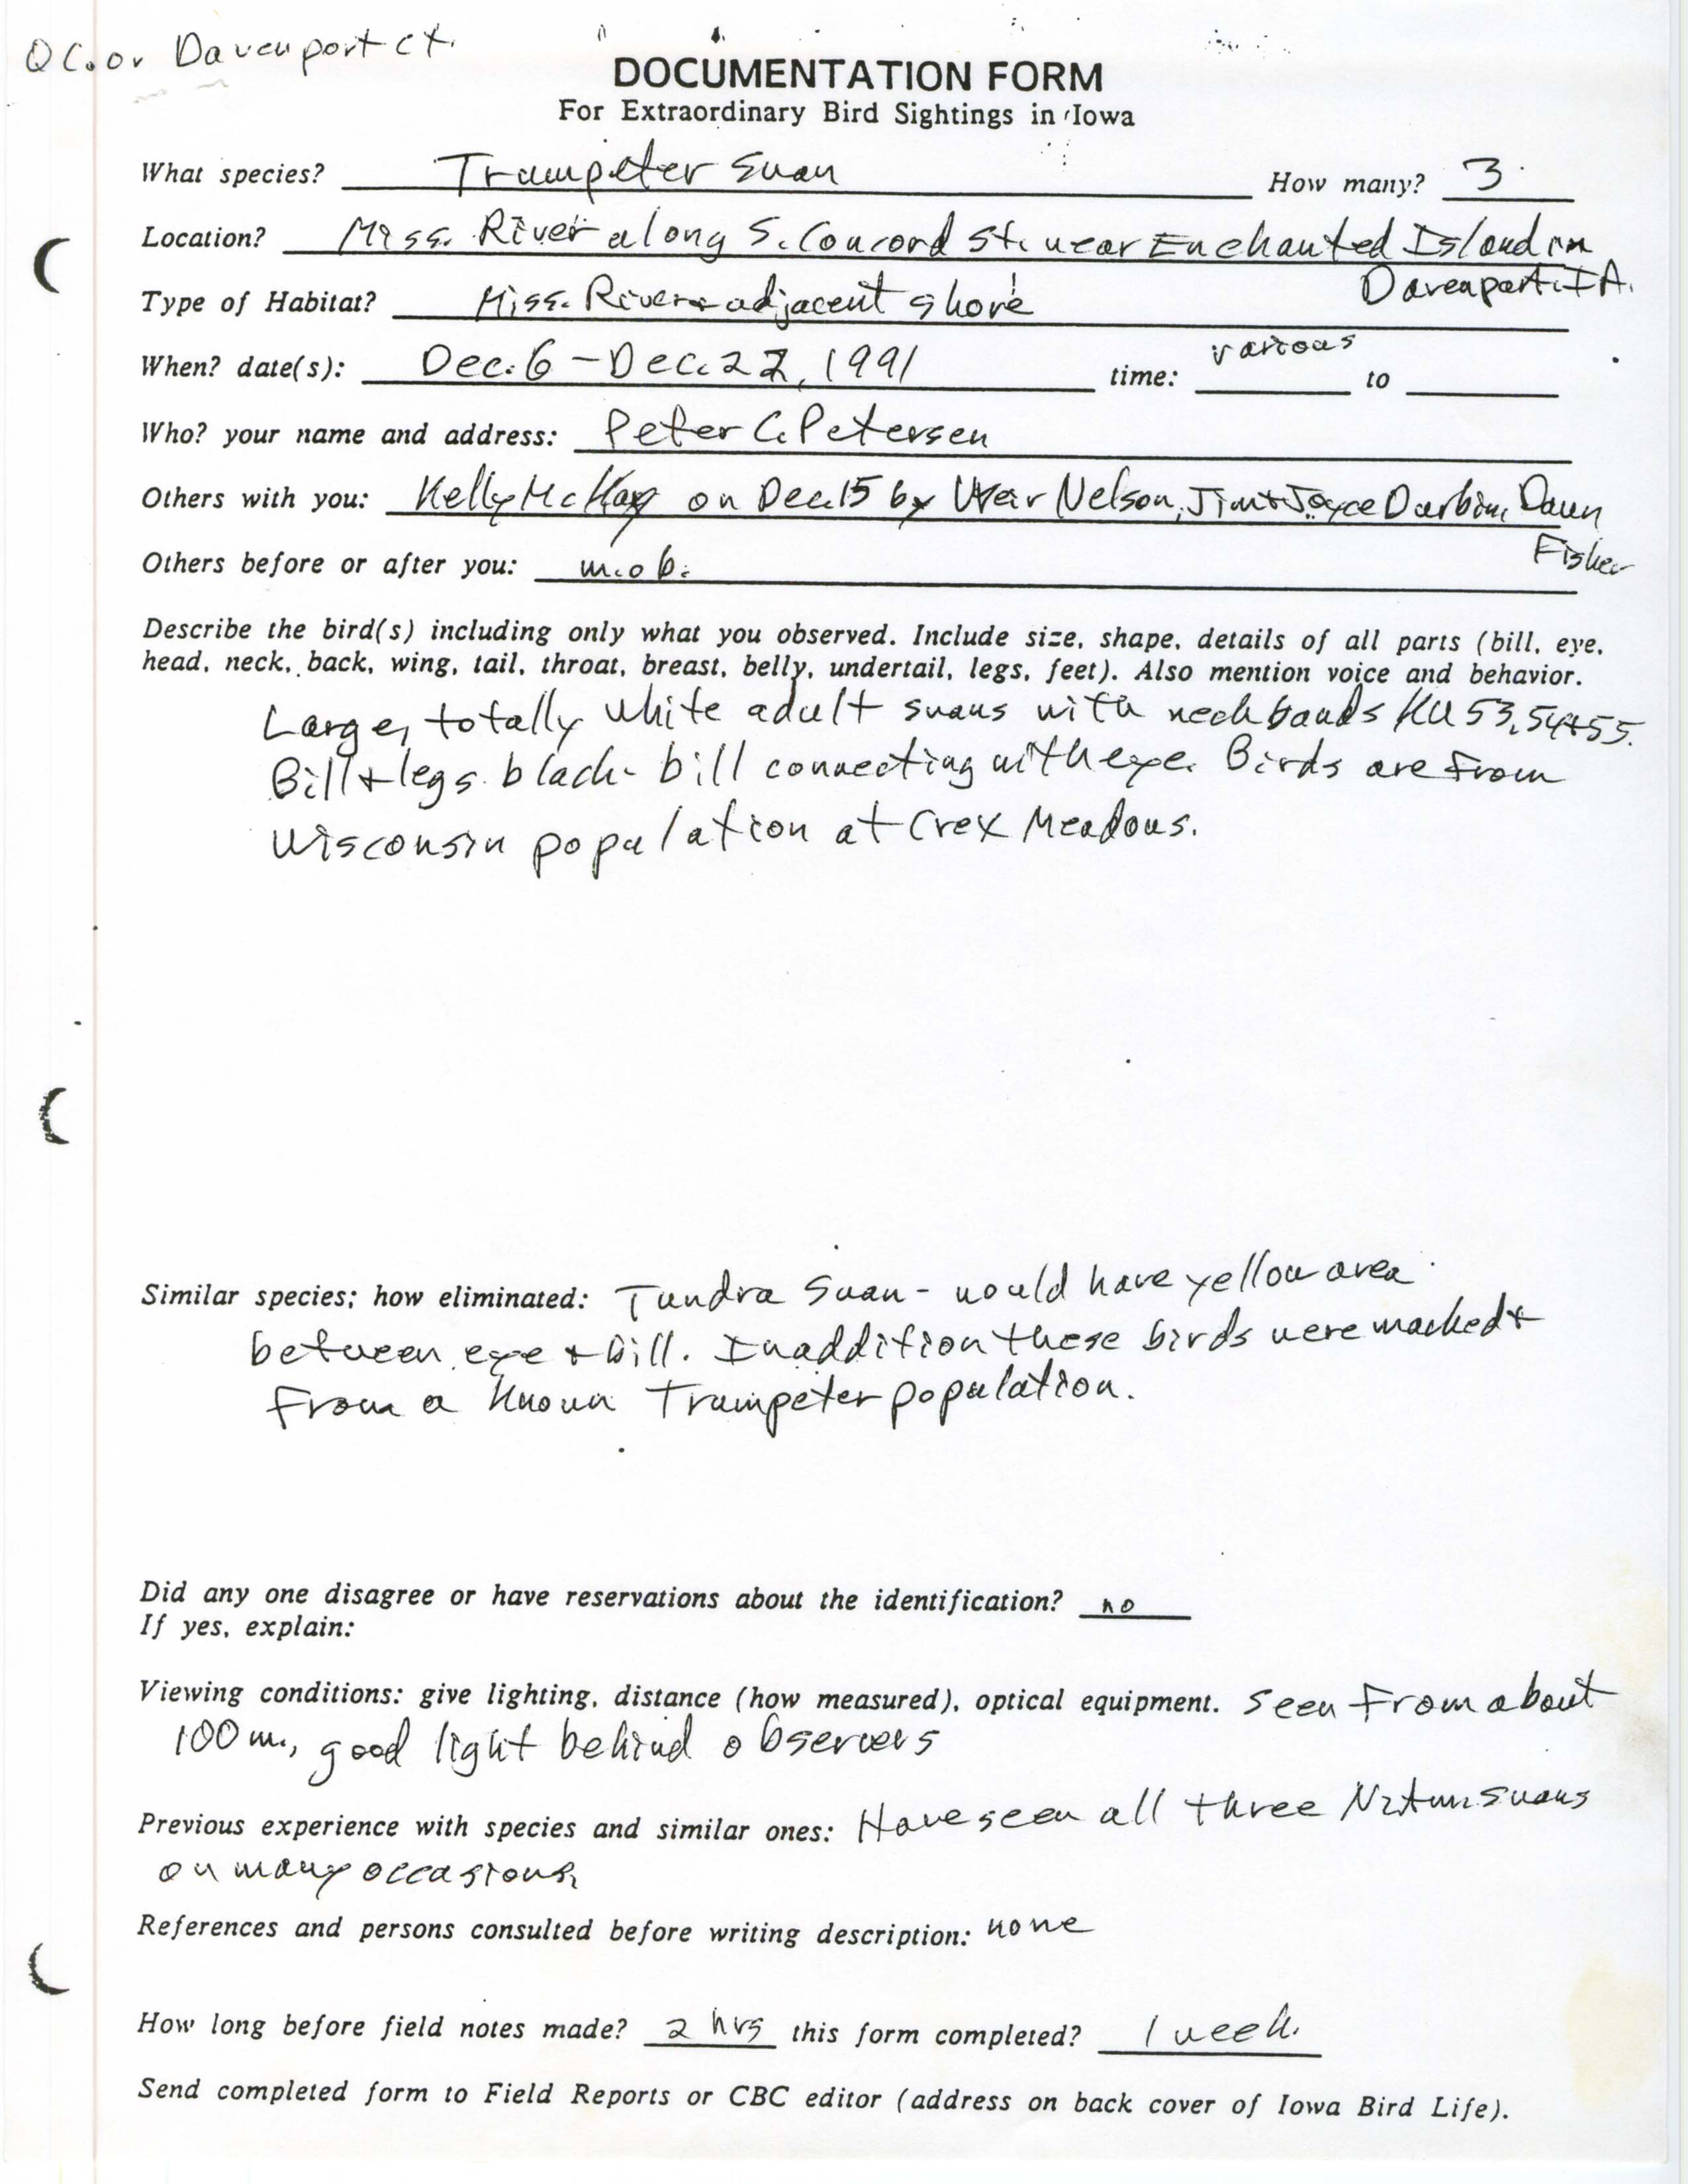 Rare bird documentation form for Trumpeter Swan at Mississippi River in Davenport, 1991